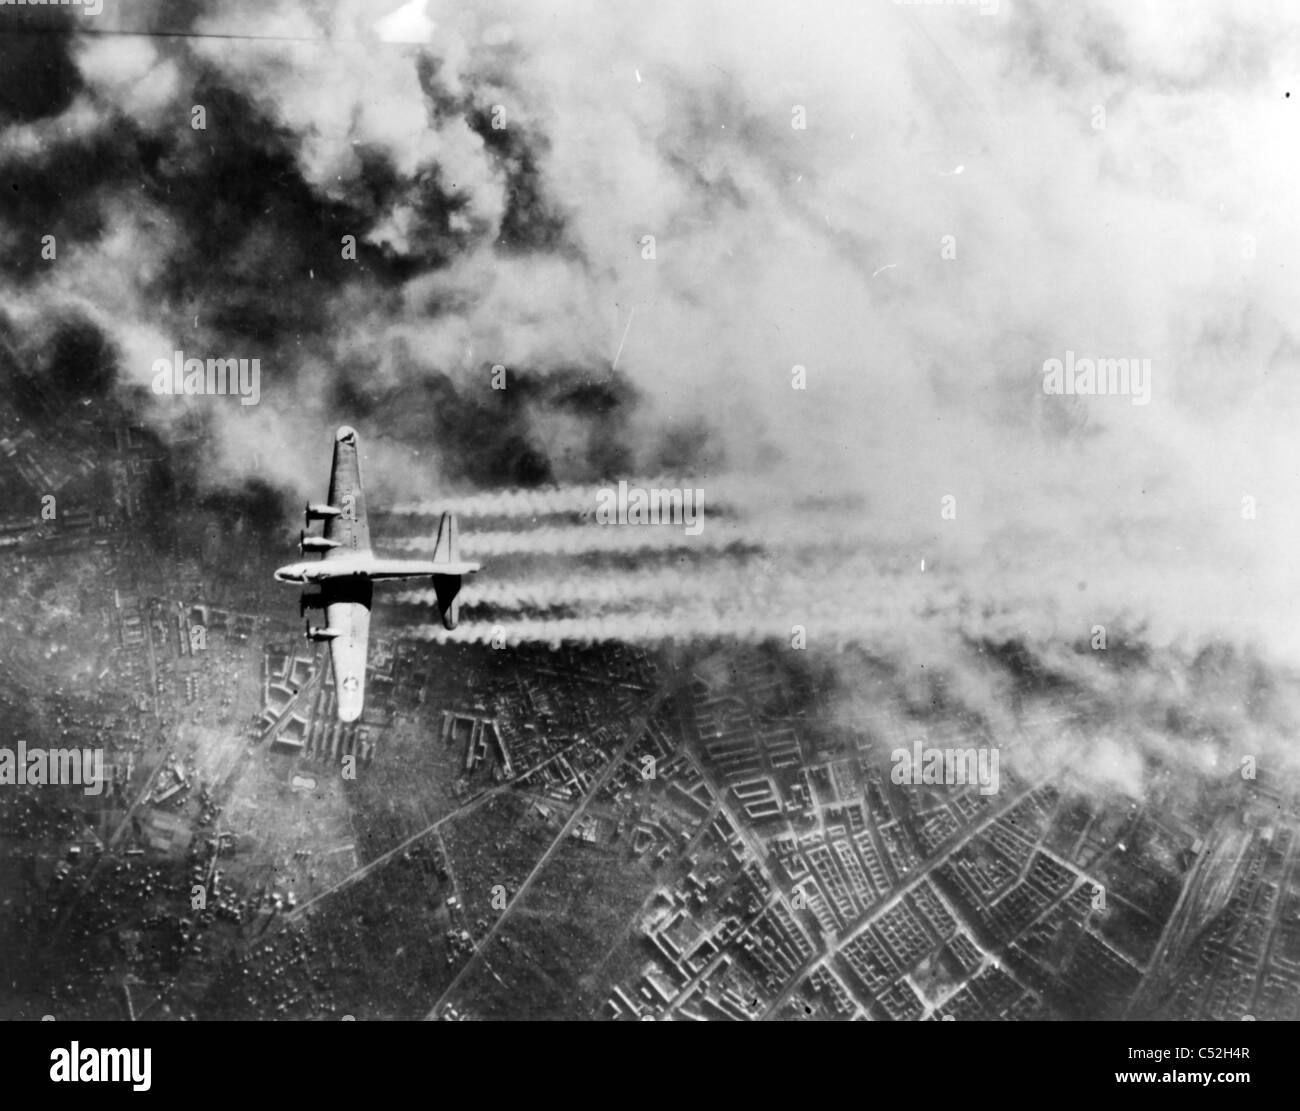 B-17 bomber flying over germany during WWII Stock Photo